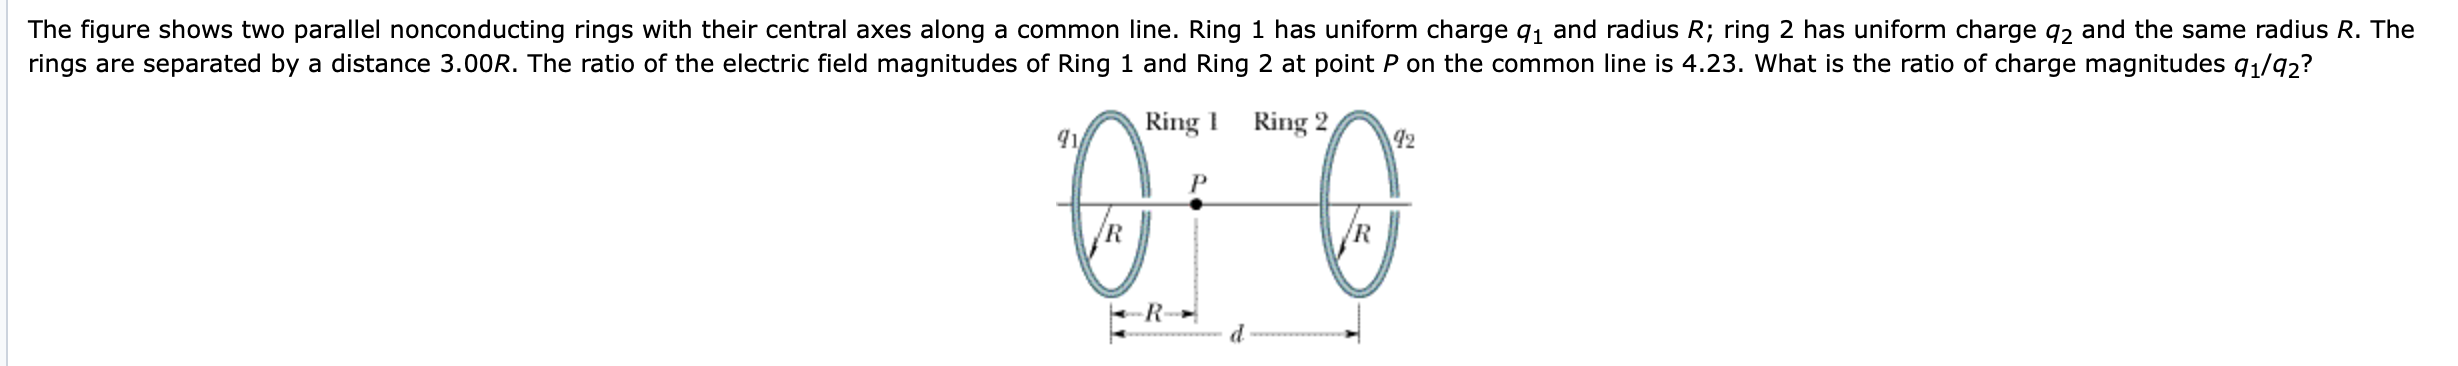 The figure shows two parallel nonconducting rings with their central axes along a common line. Ring 1 has uniform charge q1 and radius R; ring 2 has uniform charge q2 and the same radius R. The
rings are separated by a distance 3.00R. The ratio of the electric field magnitudes of Ring 1 and Ring 2 at point P on the common line is 4.23. What is the ratio of charge magnitudes q1/92?
Ring 2,
42
Ring 1
/R
/R
R-
